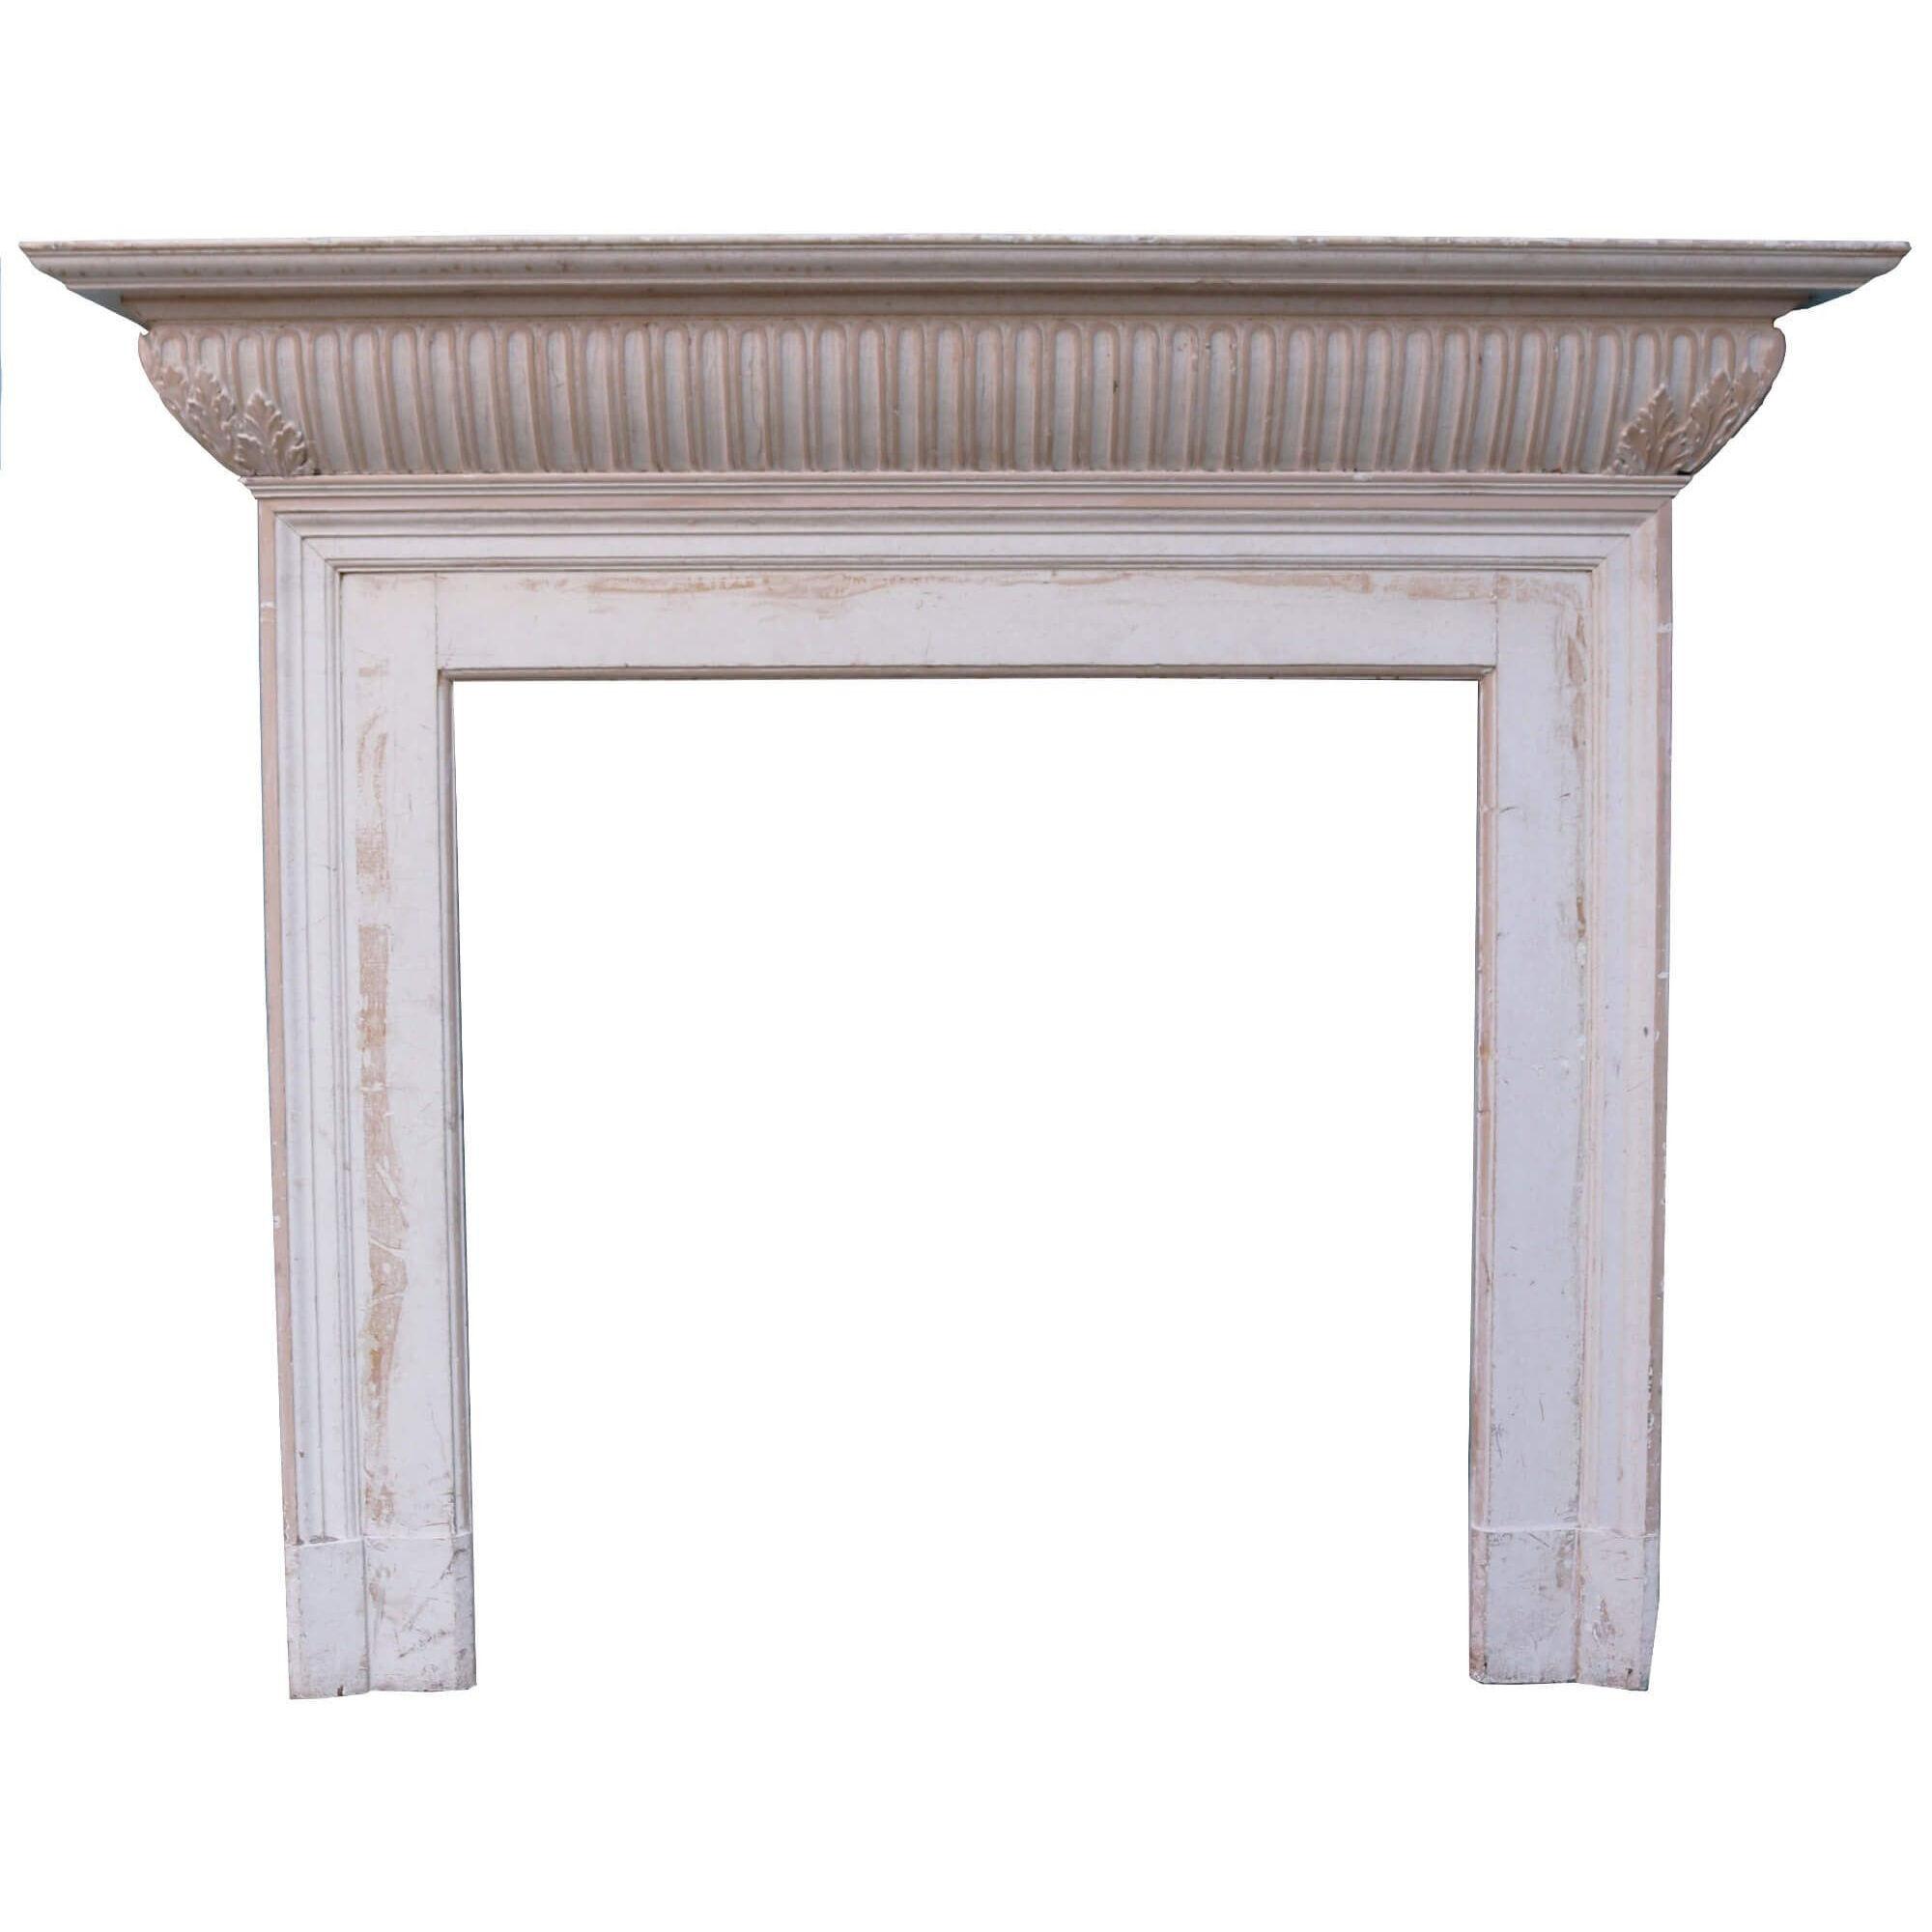 Late 19th Century Painted Antique Fireplace Surround